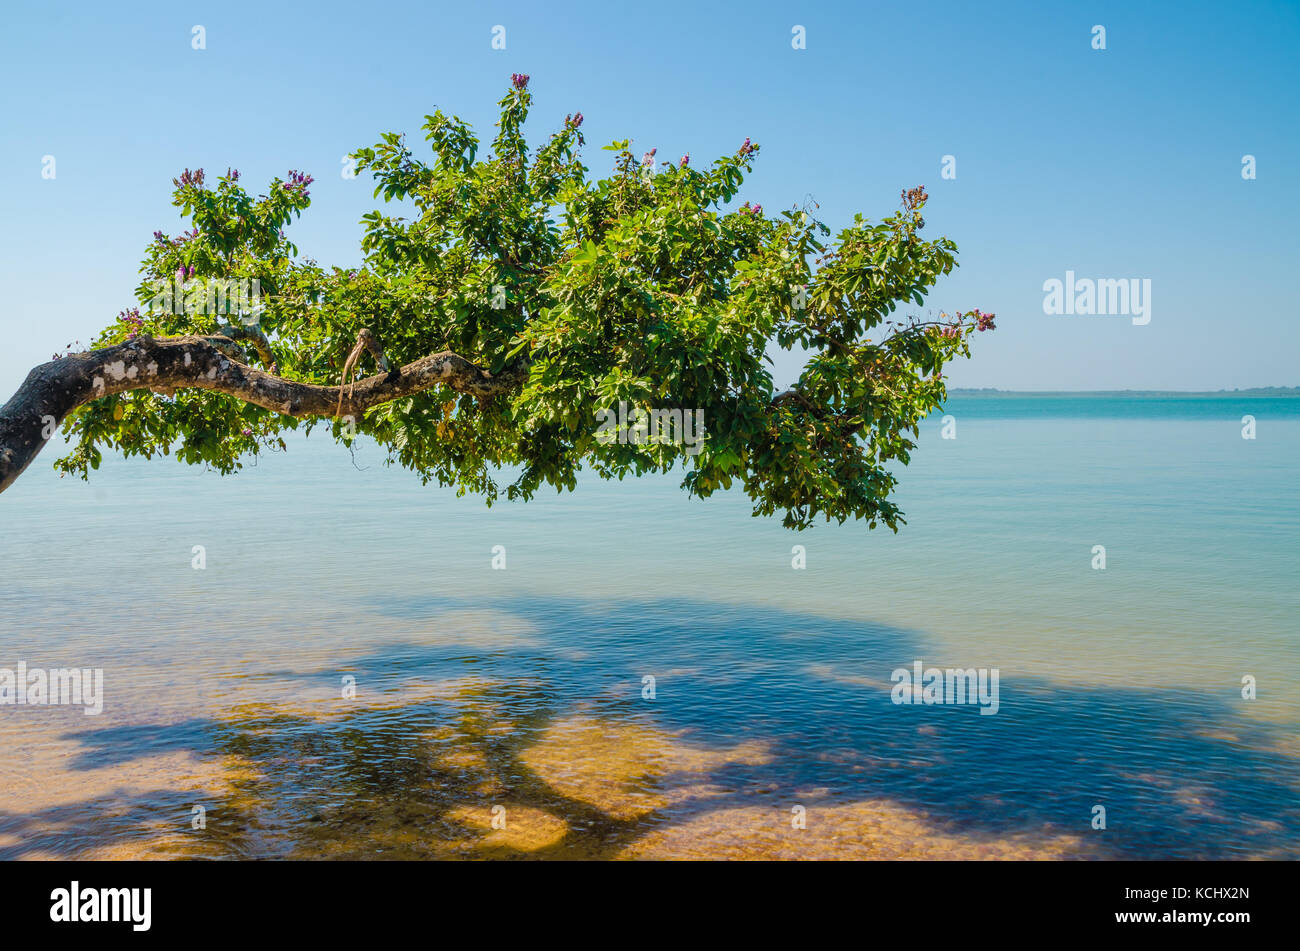 Beautiful landscape of tree growing over ocean at beach of Bijagos island Bubaque, Guinea Bissau, West Africa Stock Photo